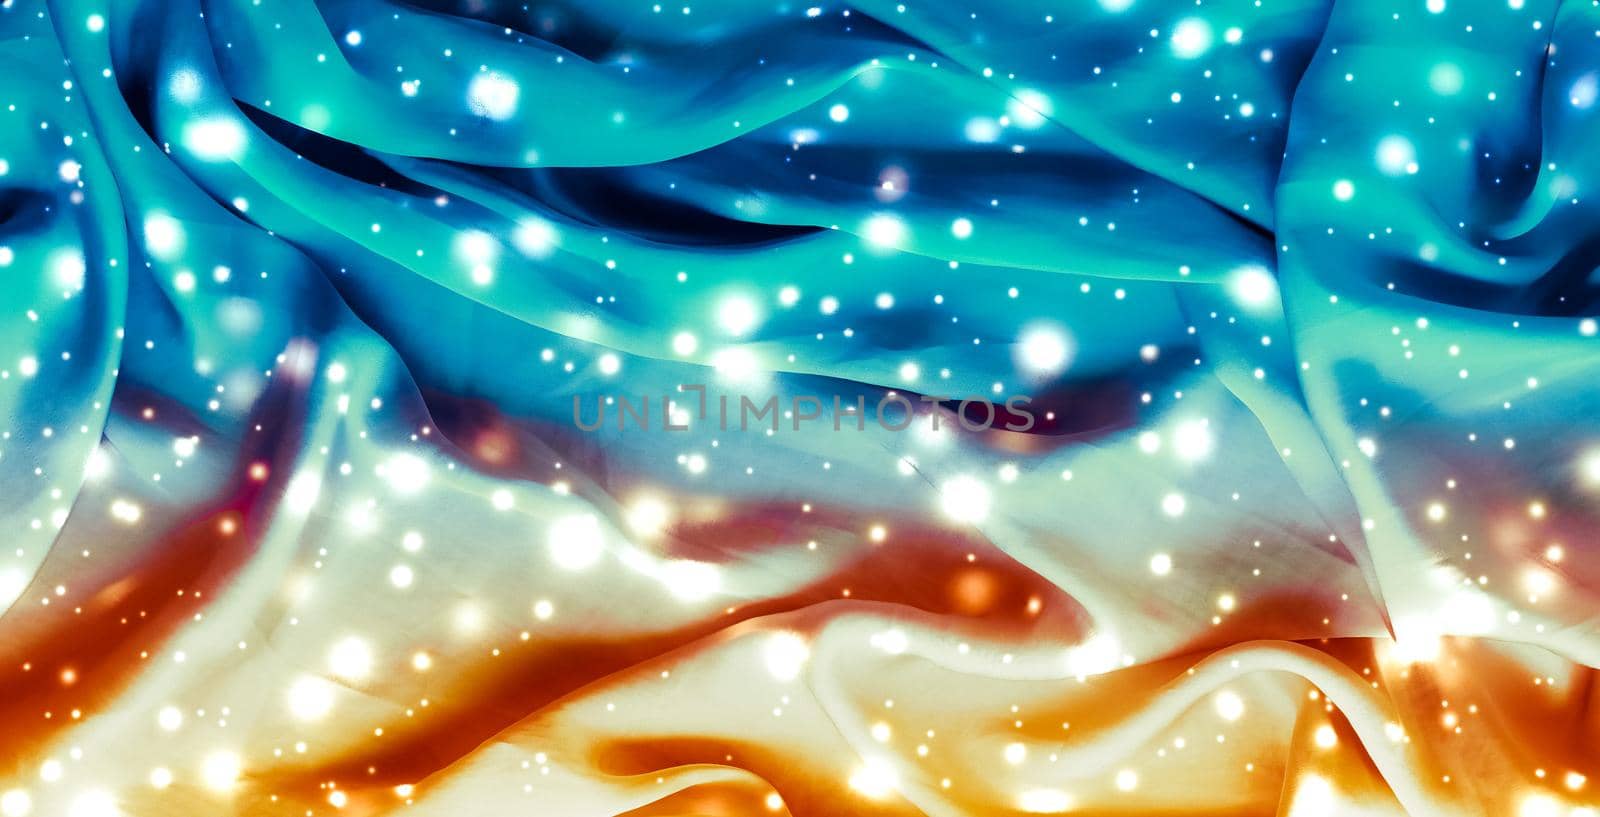 Winter fashion, shiny fabric and glamour style concept - Magic holiday blue and gold soft silk flatlay background texture with glowing snow, luxury beauty abstract backdrop